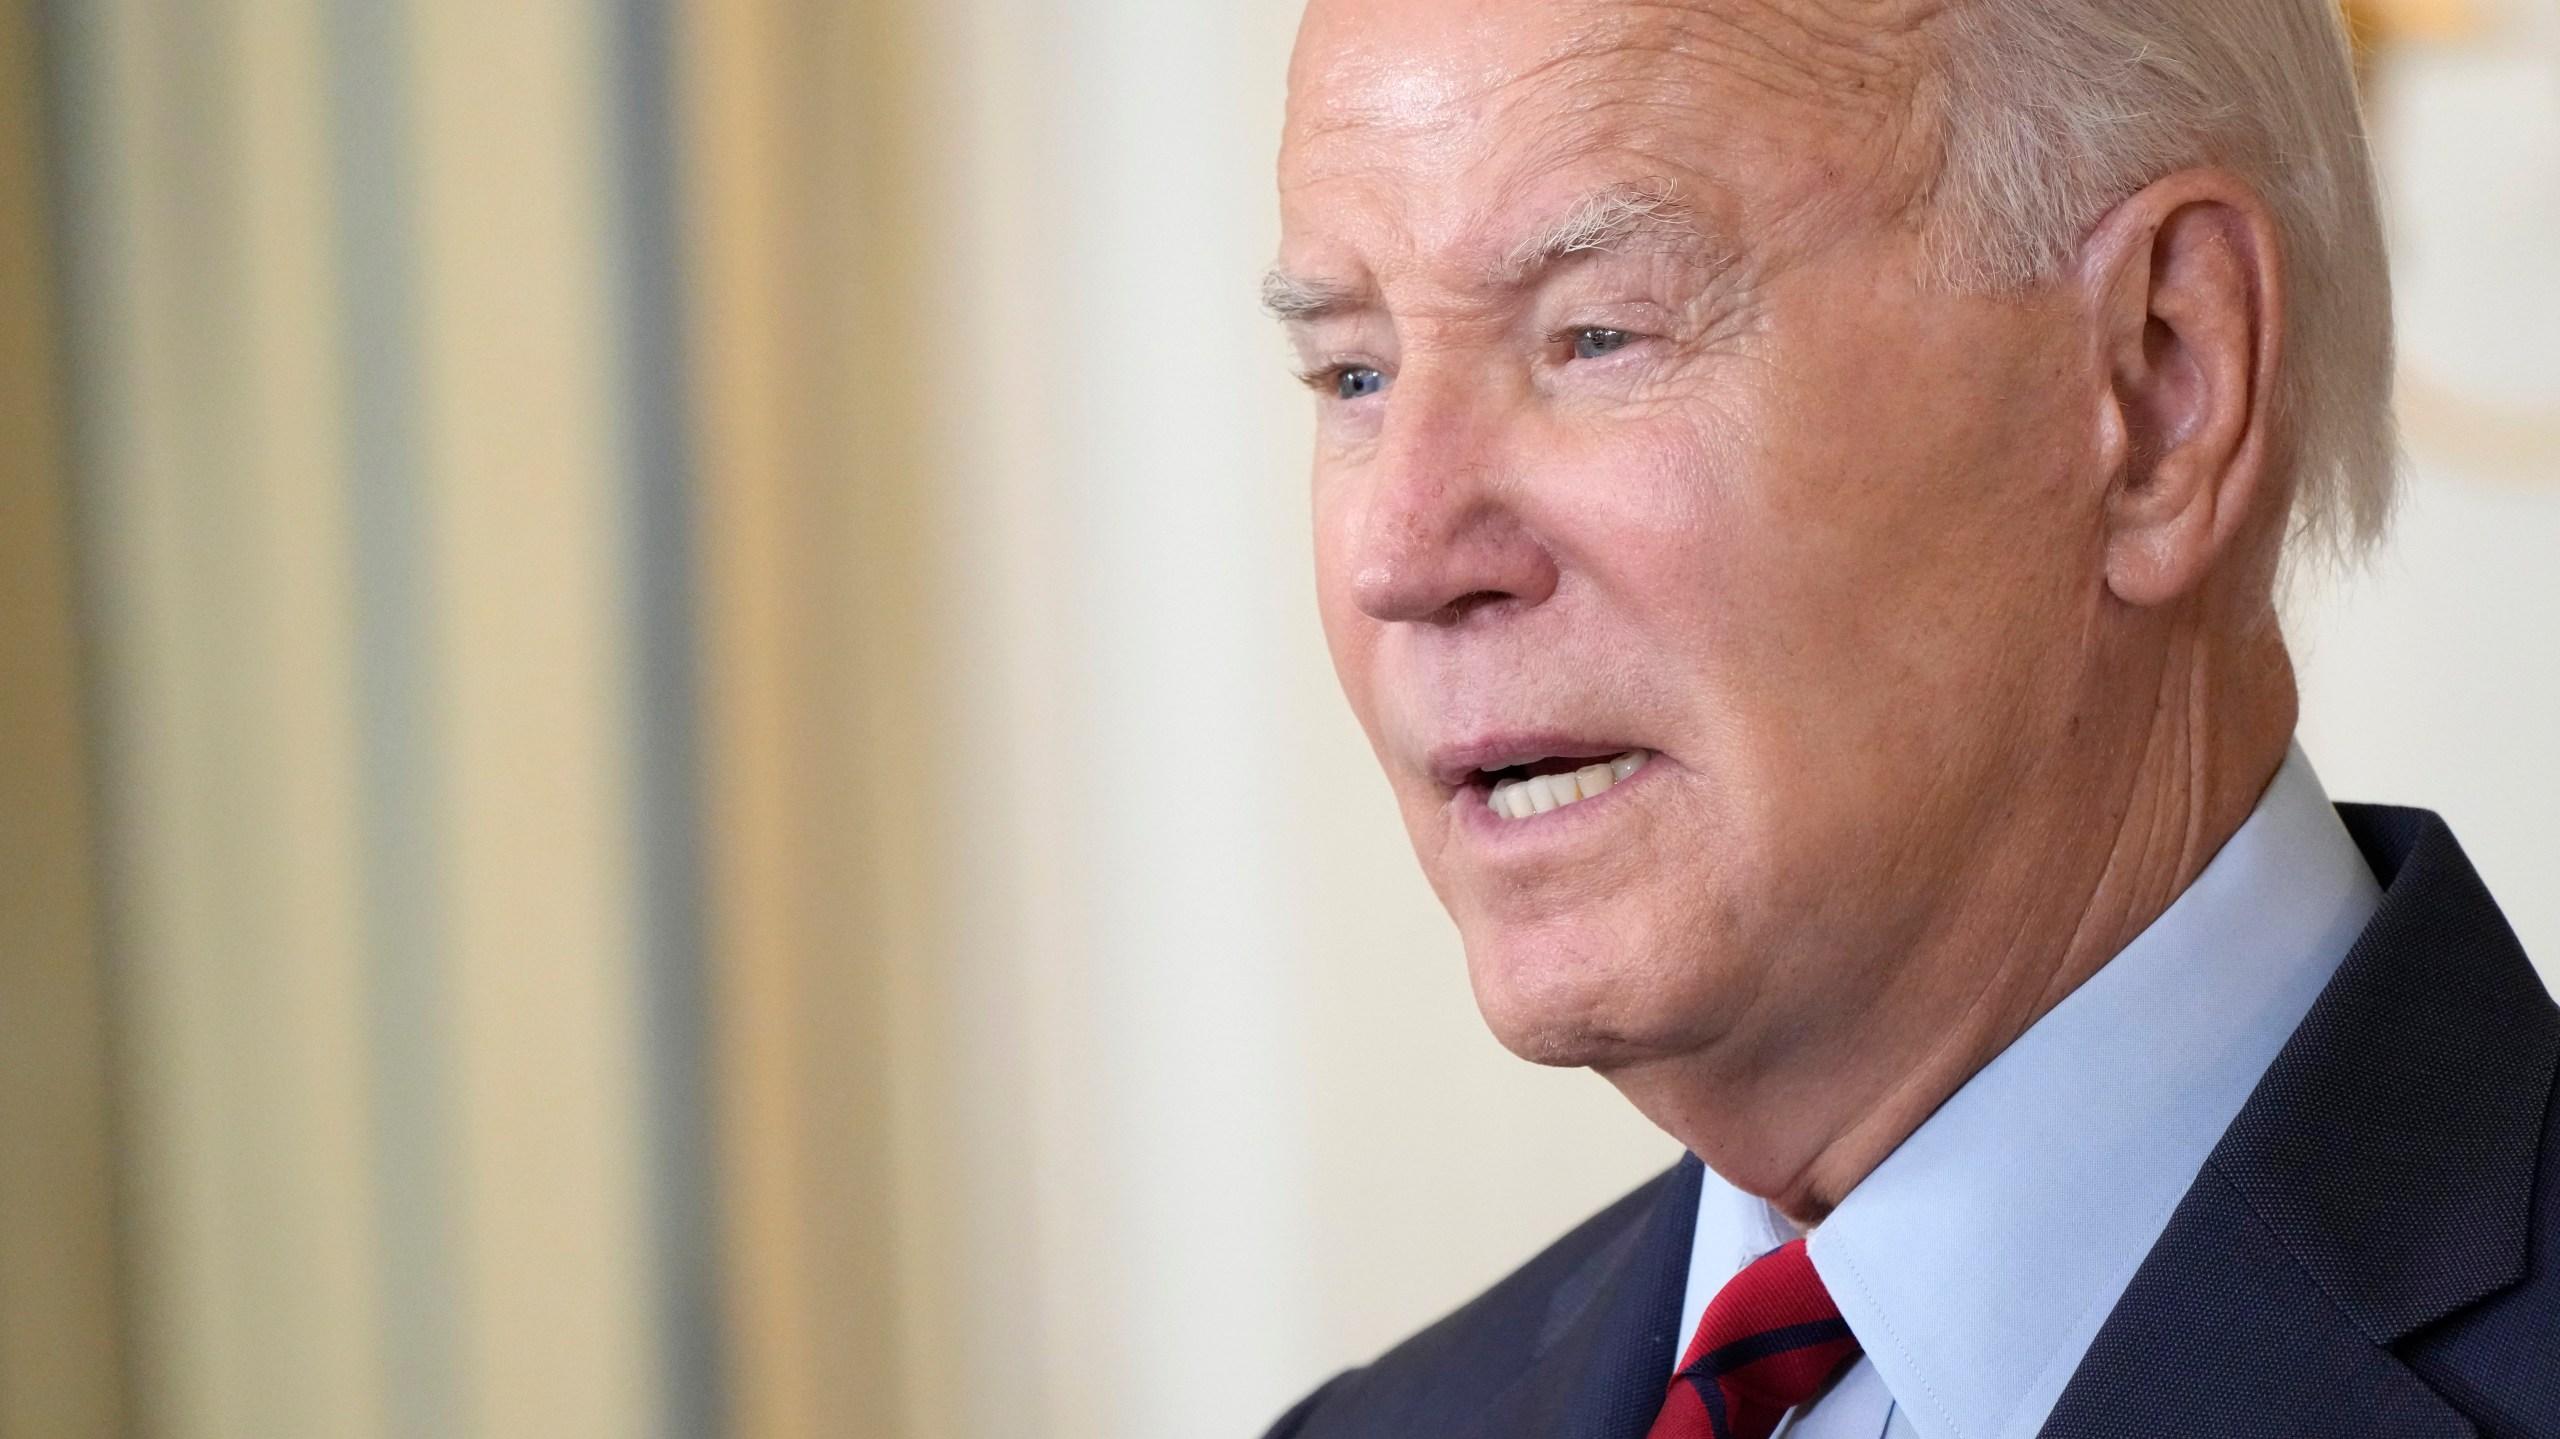 Biden refuses to grant some of the conditions that defendants